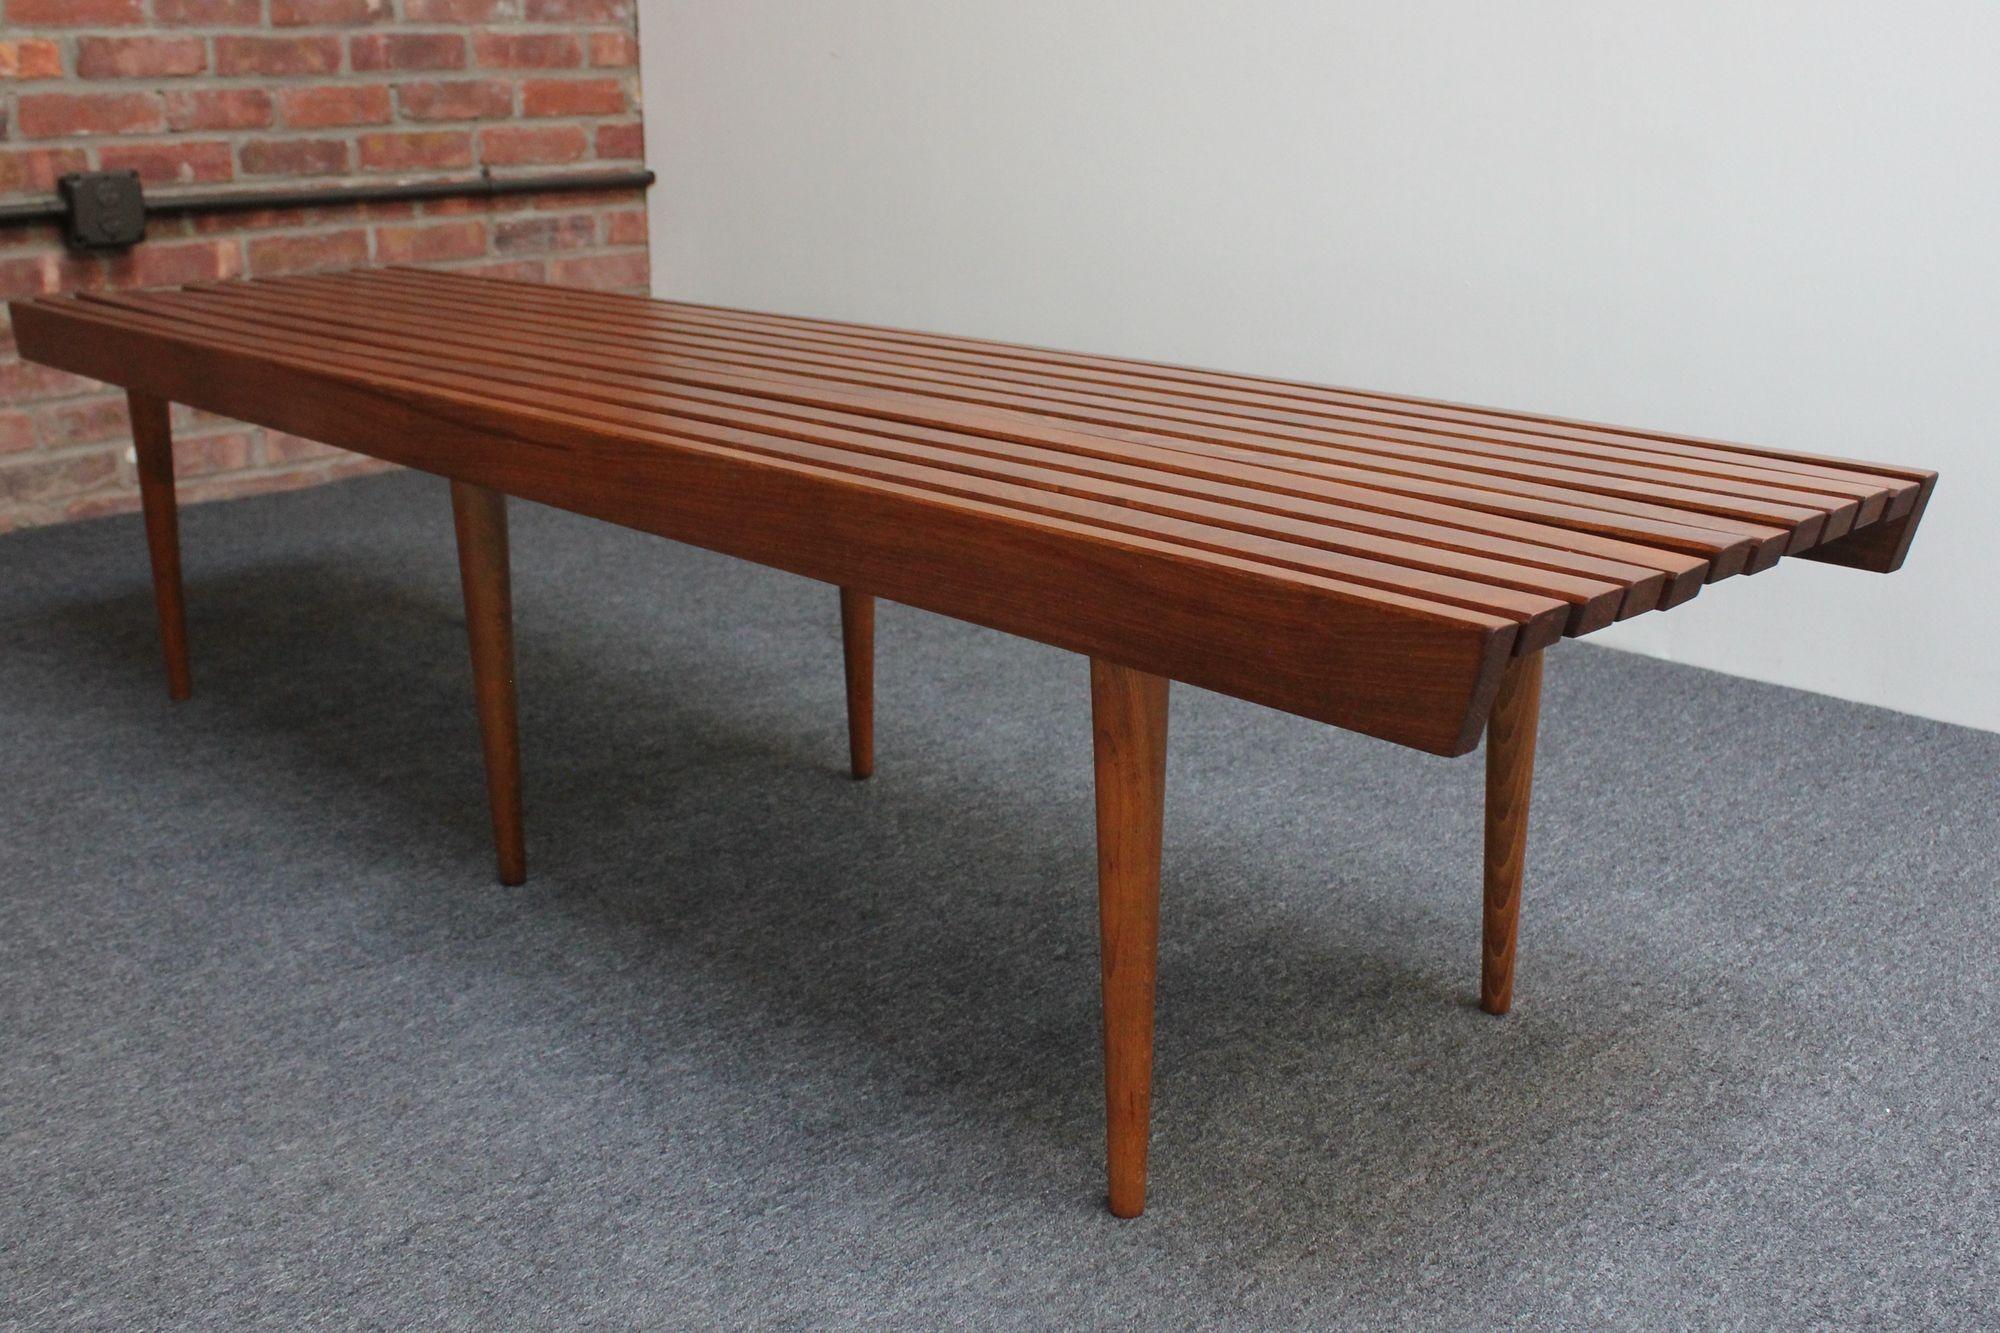 Long Mid-Century Modern Walnut Slatted Bench / Coffee Table with Tapered Legs For Sale 3